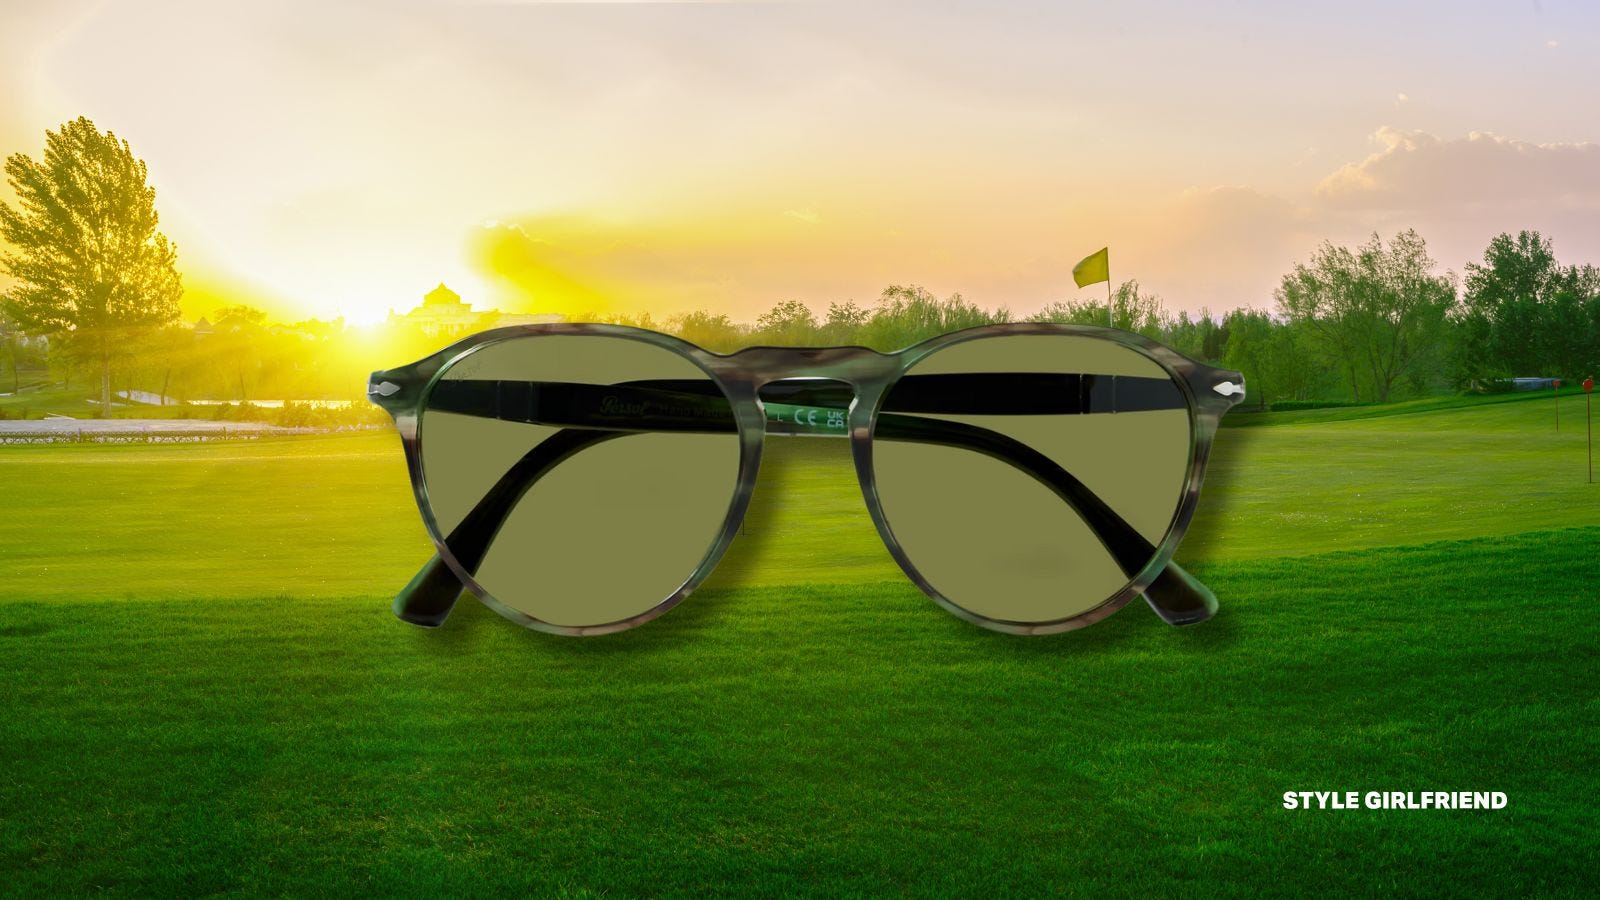 men's acetate sunglasses with green tint lenses, set against a golf green background